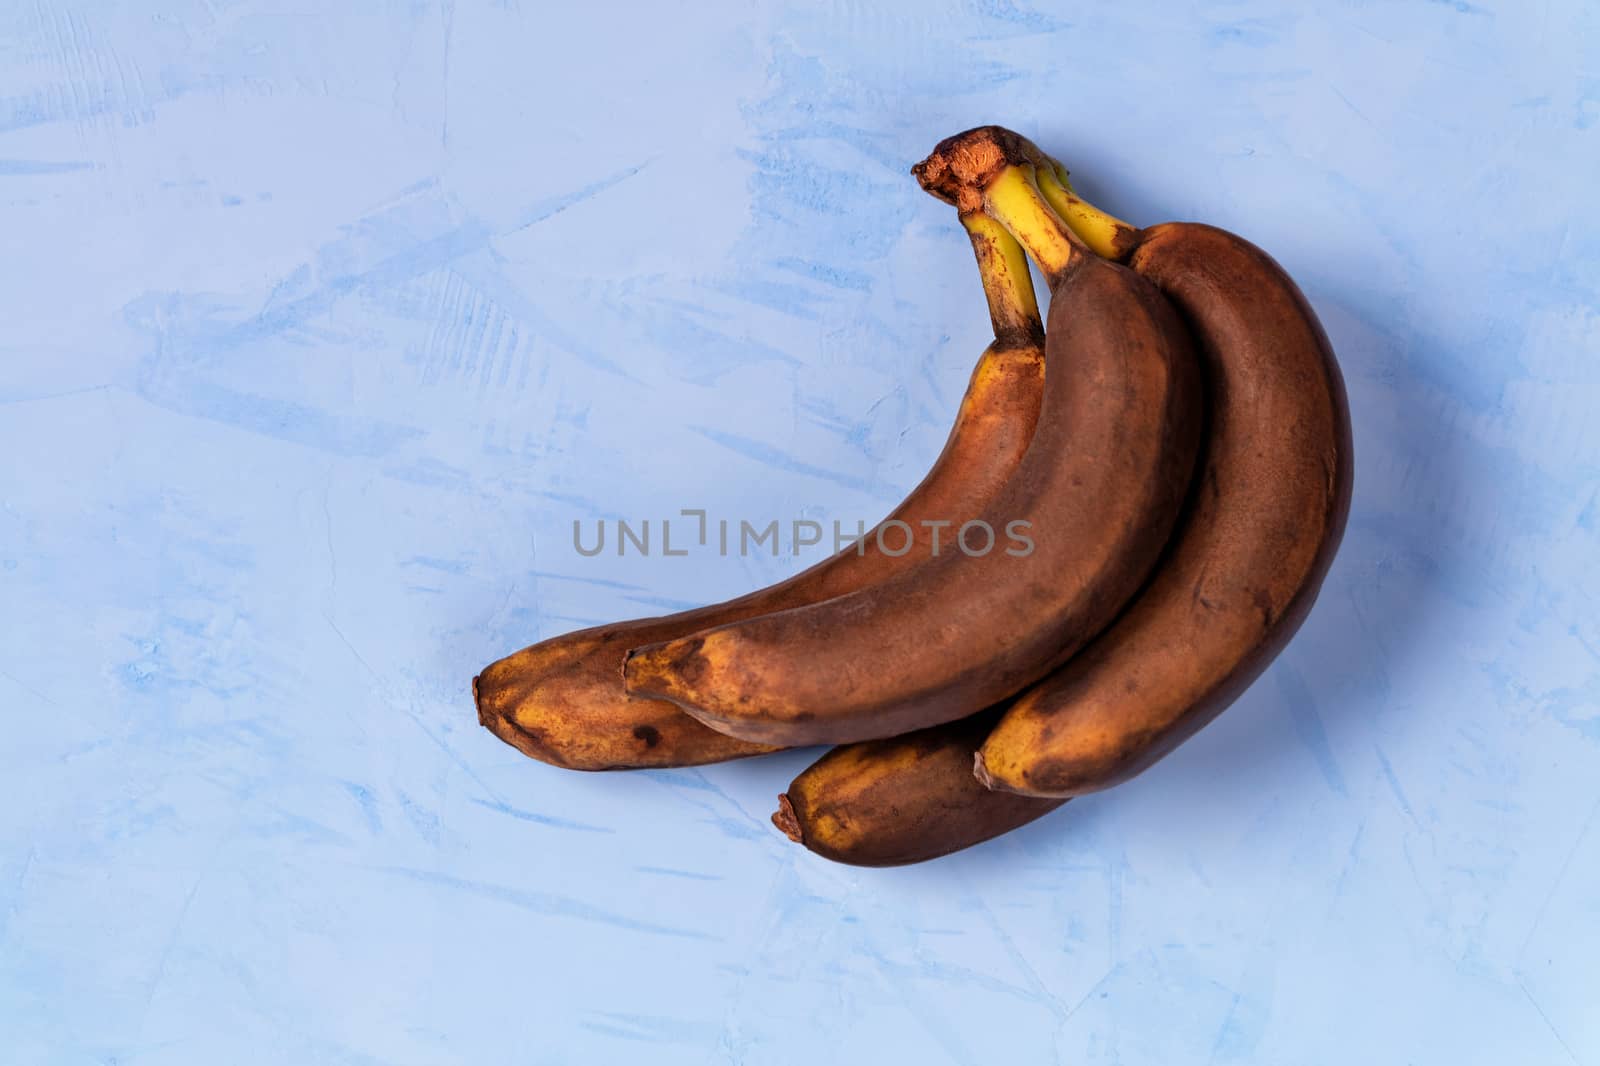 Ugly ripe bananas lie on a background of blue stucco. by Sergii